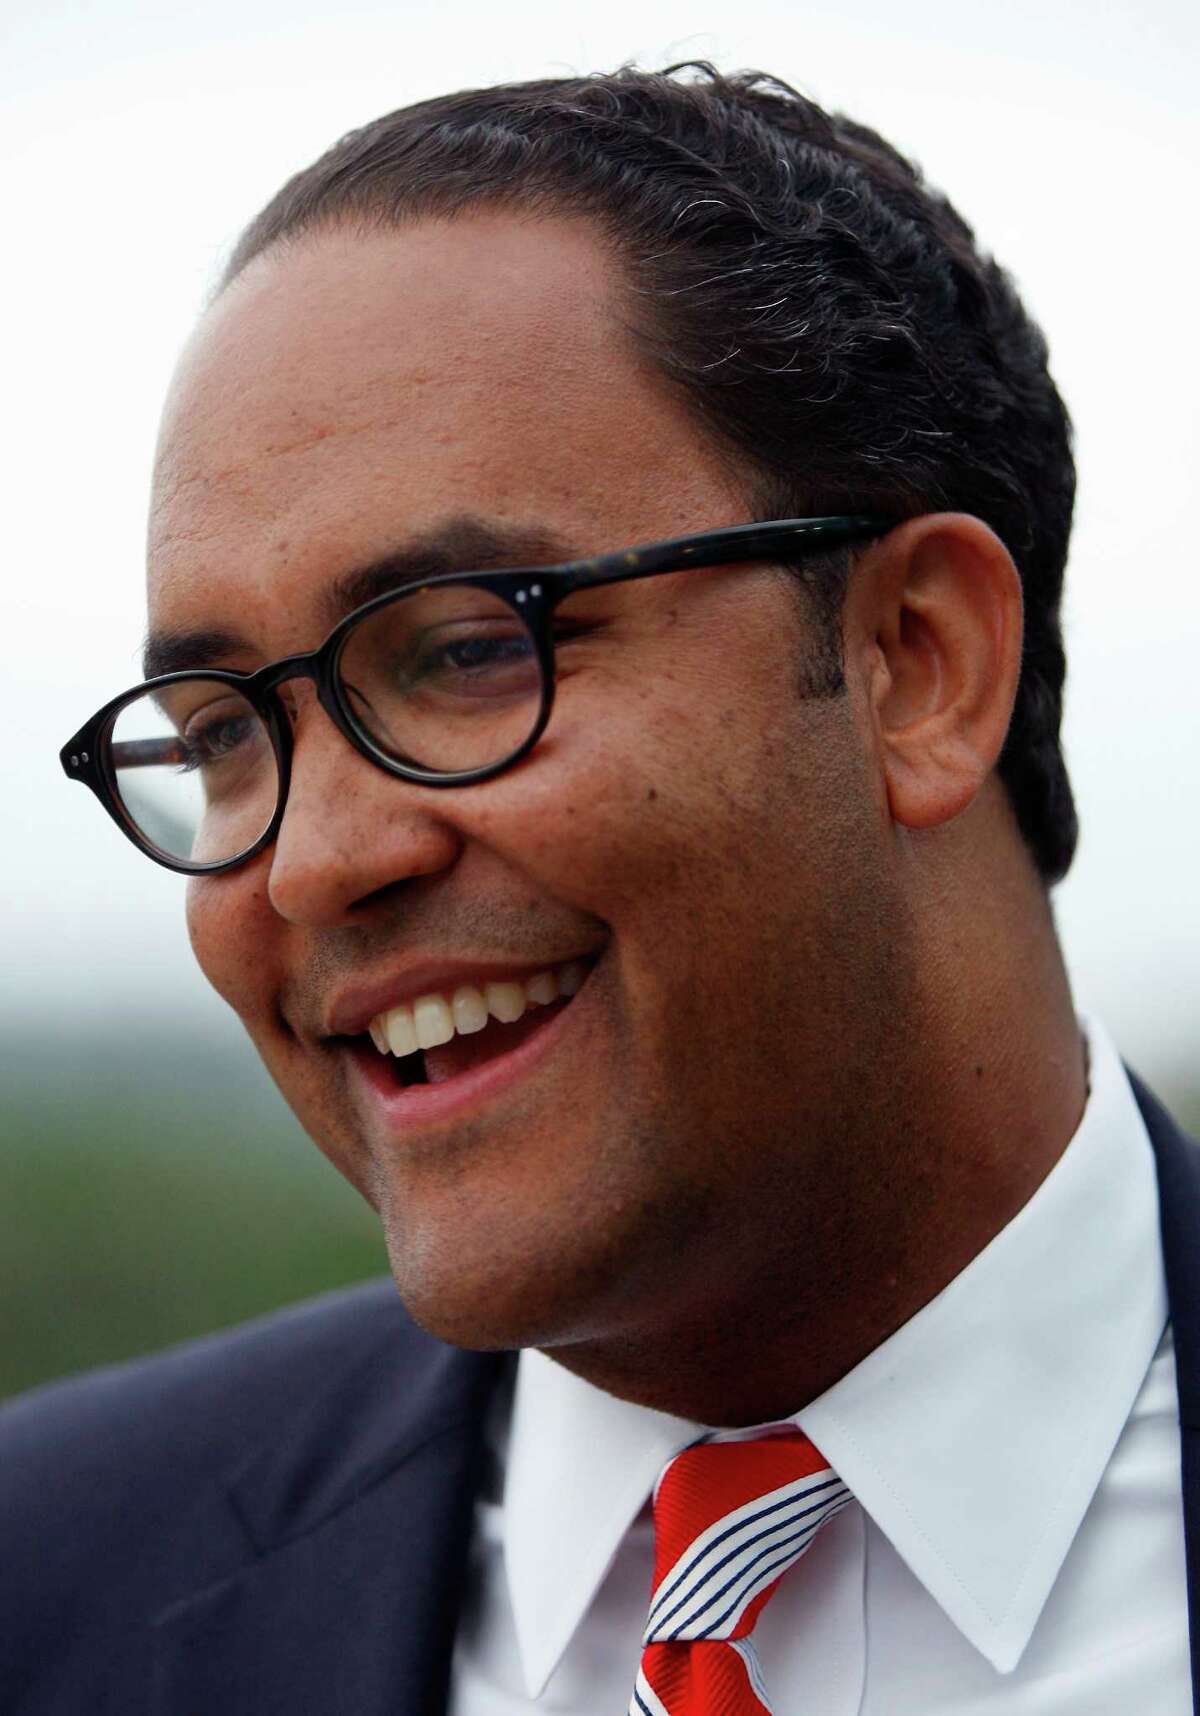 Will Hurd is seen Tuesday night May 27, 2014 at his watch party as results roll in for his GOP primary runoff against Francisco "Quico" Canseco.